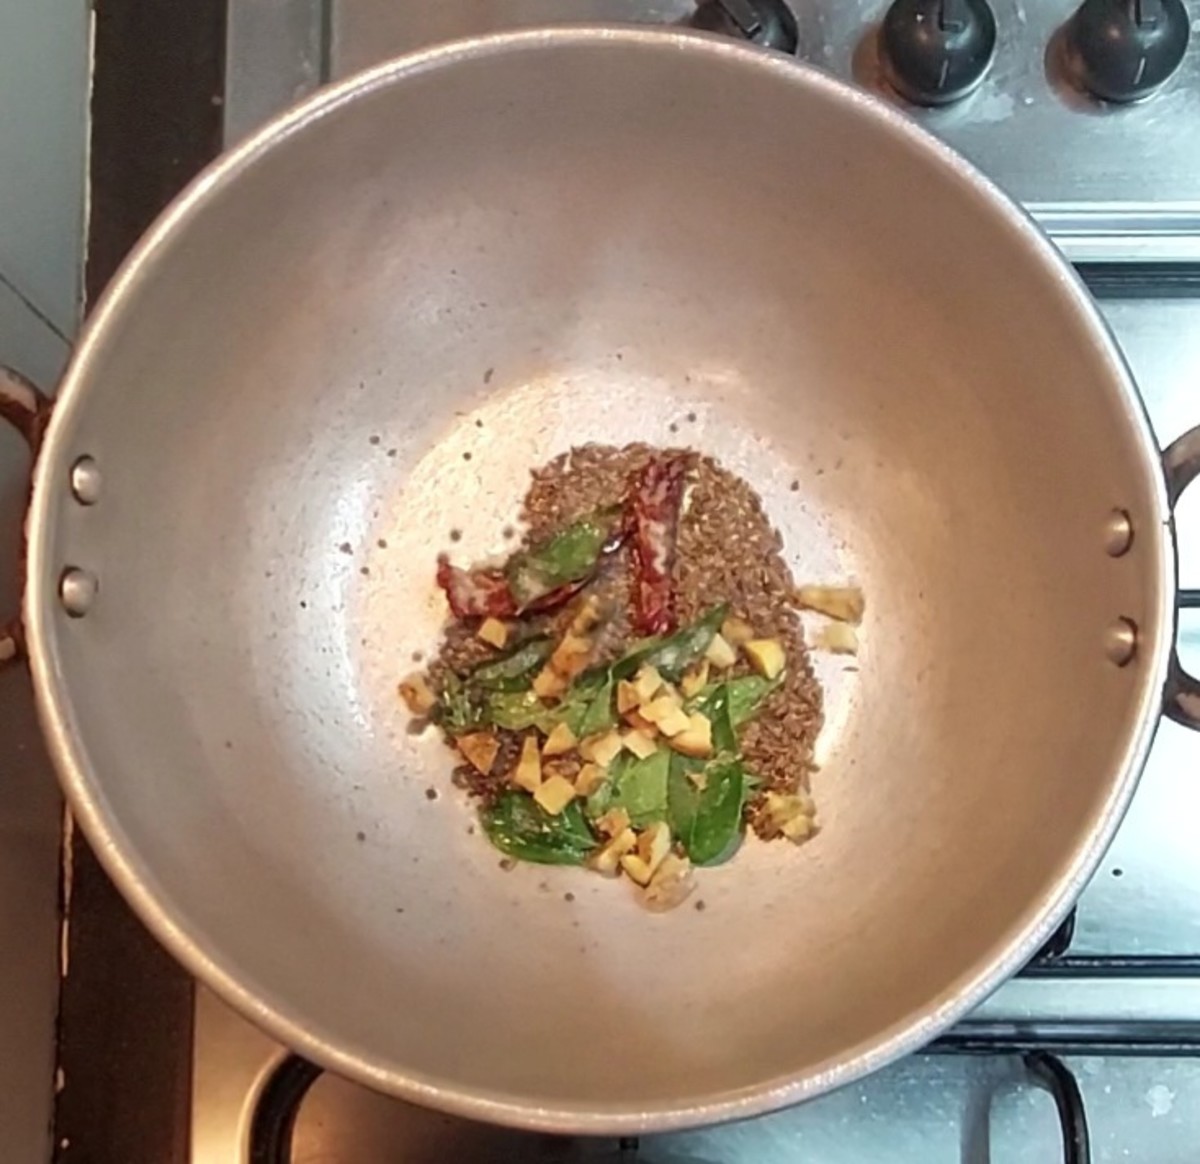 In a pan, heat 1 teaspoon oil, splutter 1/2 teaspoon mustard seeds, 1 teaspoon cumin seeds, add 1-2 red chilies, a spring of curry leaves, 1/4 teaspoon hing, 1 teaspoon chopped ginger, fry for a minute.